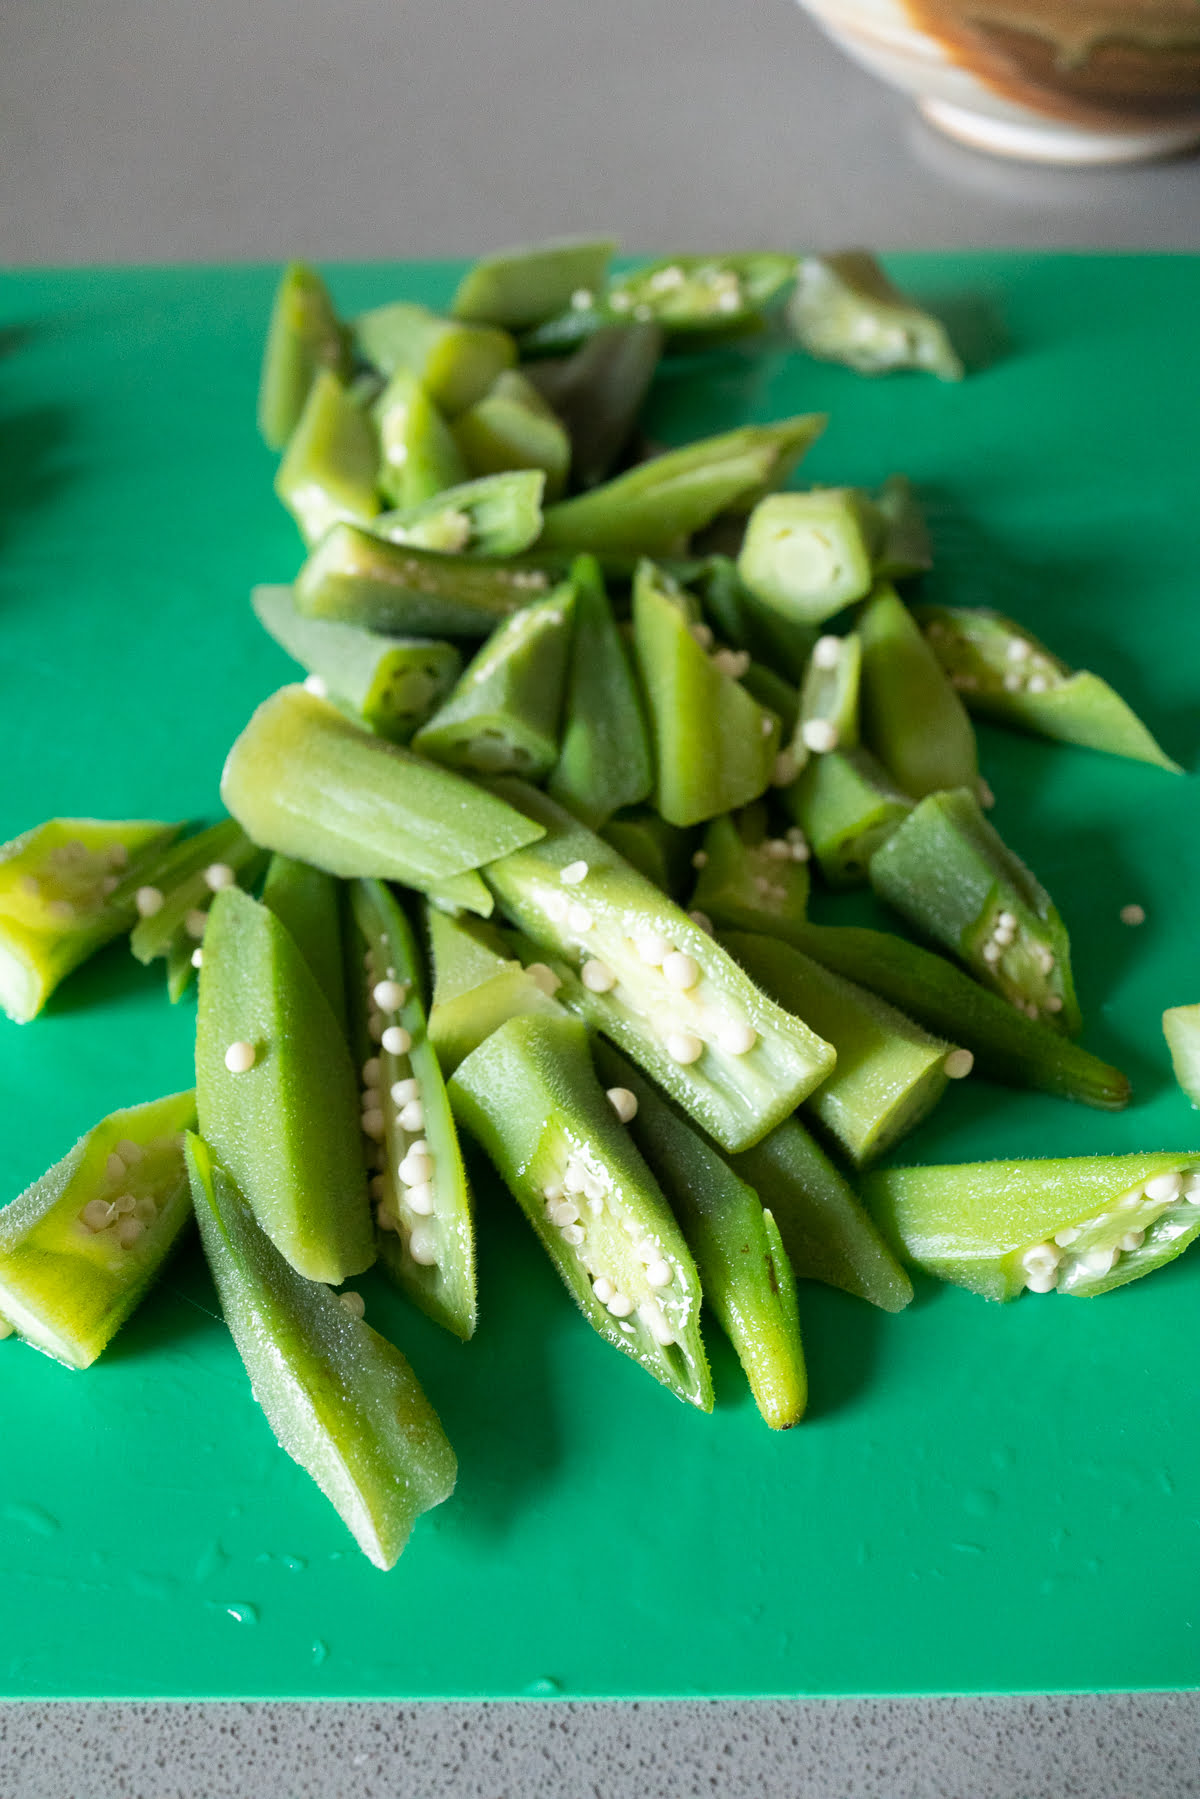 A pile of fresh okra, just boiled and sliced.